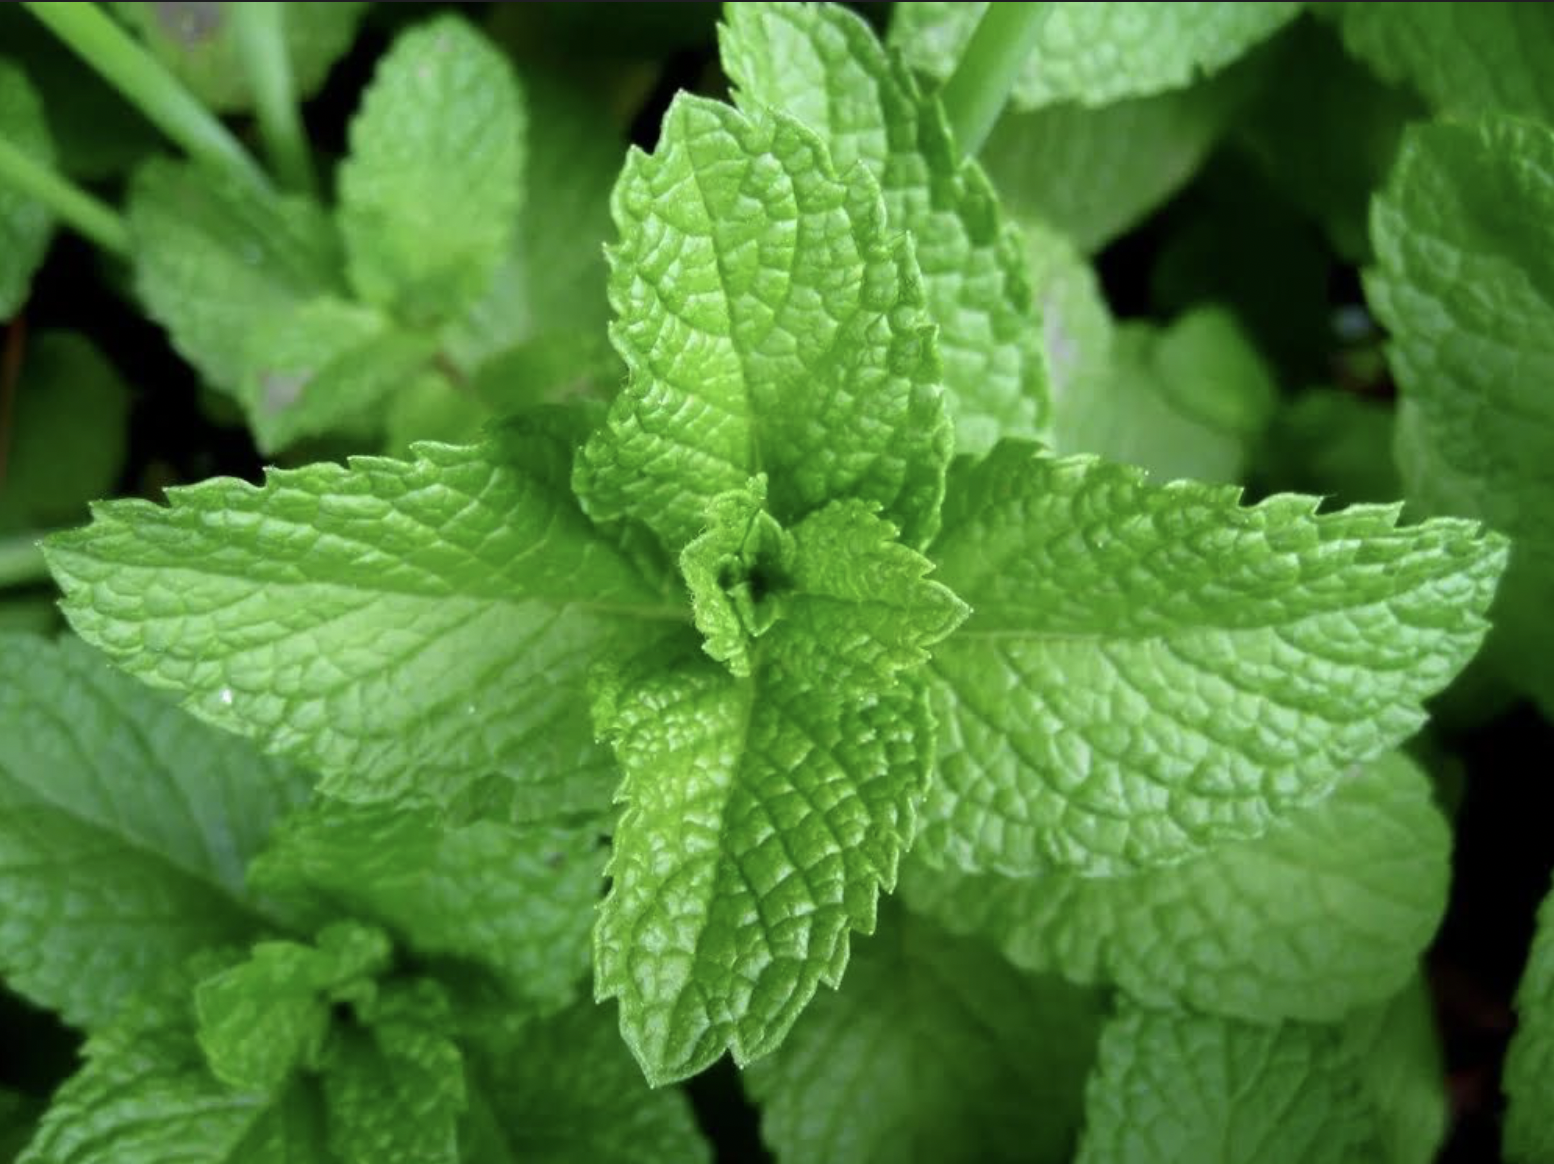 In her book and Herbs & Proverbs by the late Arona Petersen, our own native West Indies Weed Woman, noted, “Mint, peppermint, Spanish mint, all make a very refreshing drink. It is also a mild laxative-very soothing to the stomach and dispels gas. A few mint leaves steeped in boiling water relieves baby’s colic….” (Photo courtesy Olasee Davis)